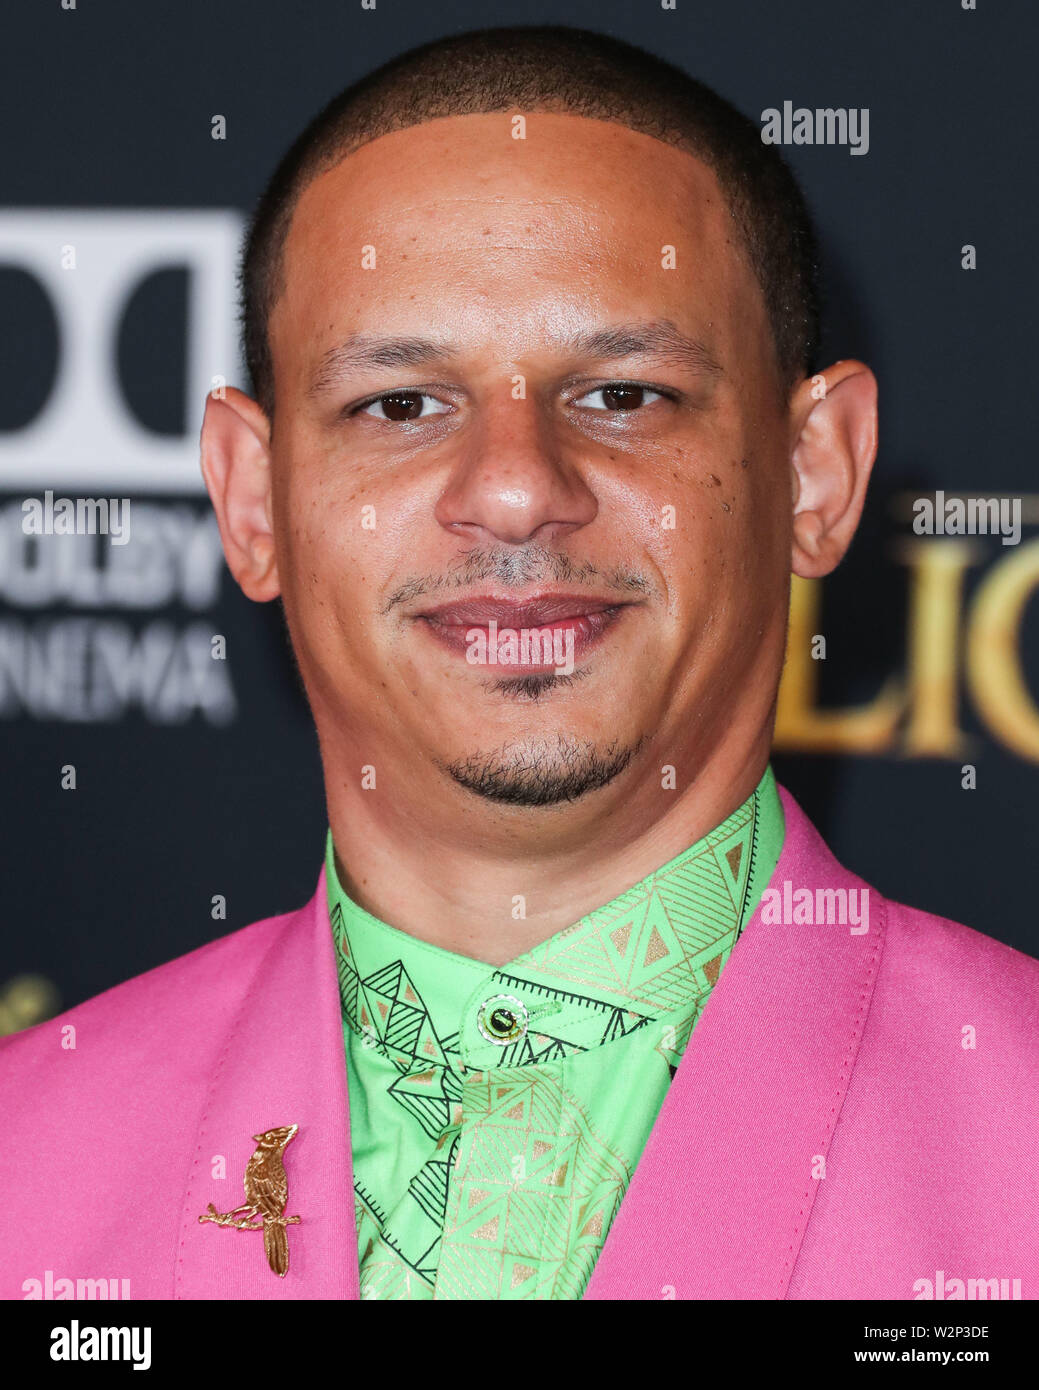 Hollywood United States 09th July 2019 Hollywood Los Angeles California Usa July 09 Actor Eric Andre Arrives At The World Premiere Of Disney S The Lion King Held At The Dolby Theatre